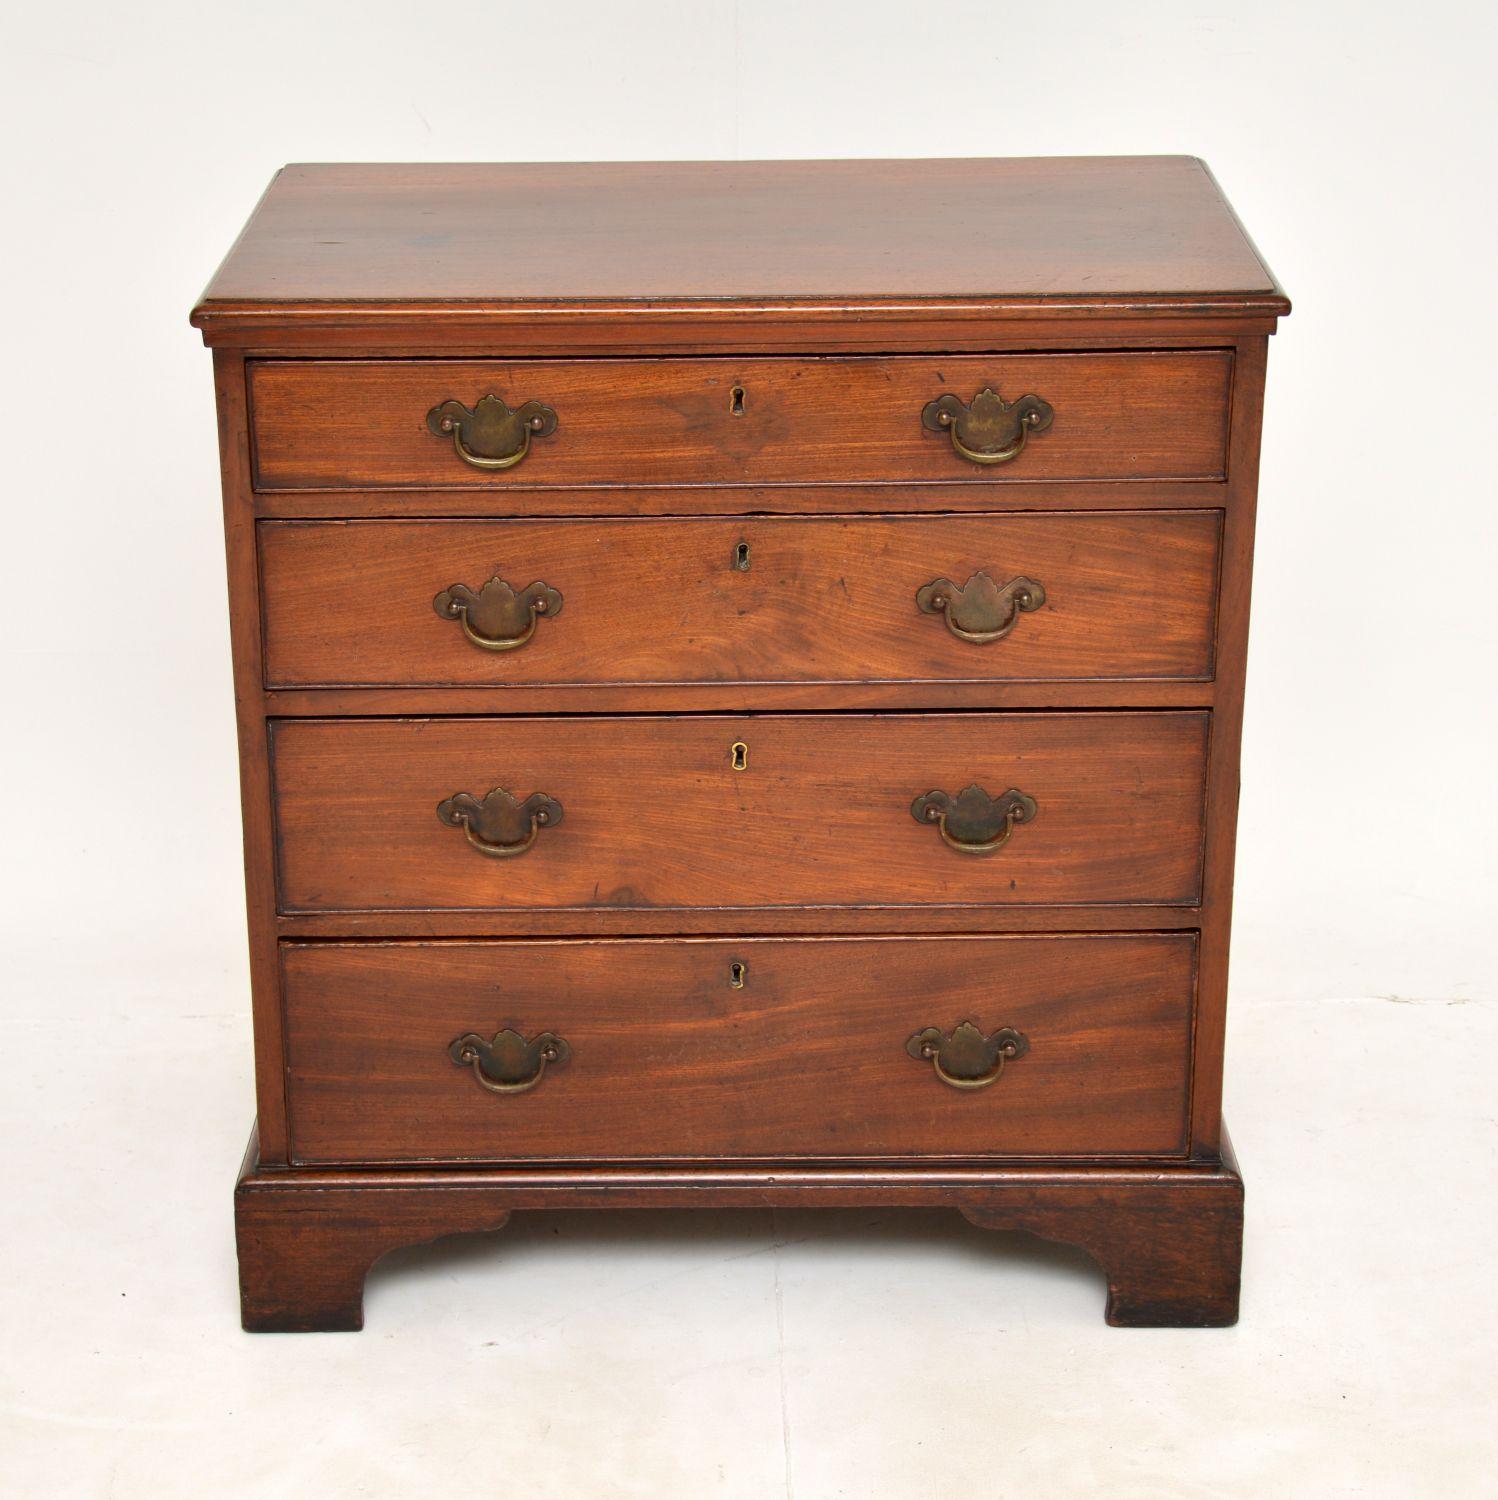 A fantastic original antique Georgian chest of drawers of nice small proportions. This was made in England, it dates from around the 1790-1810 period.
It is of extremely high quality, very well built and heavy for its size. This is solid wood